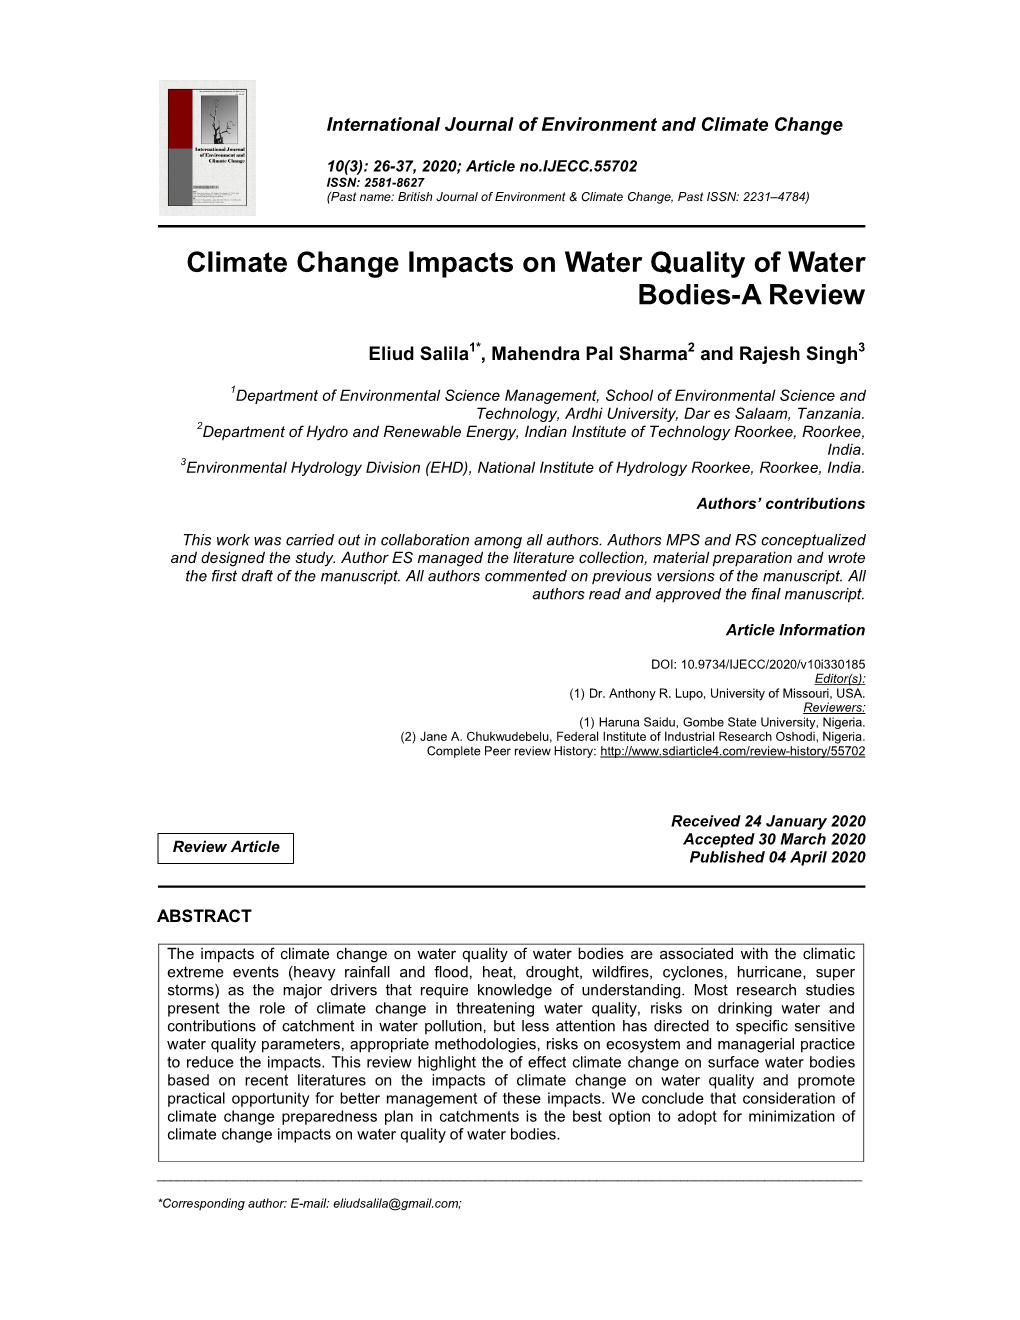 Climate Change Impacts on Water Quality of Water Bodies-A Review